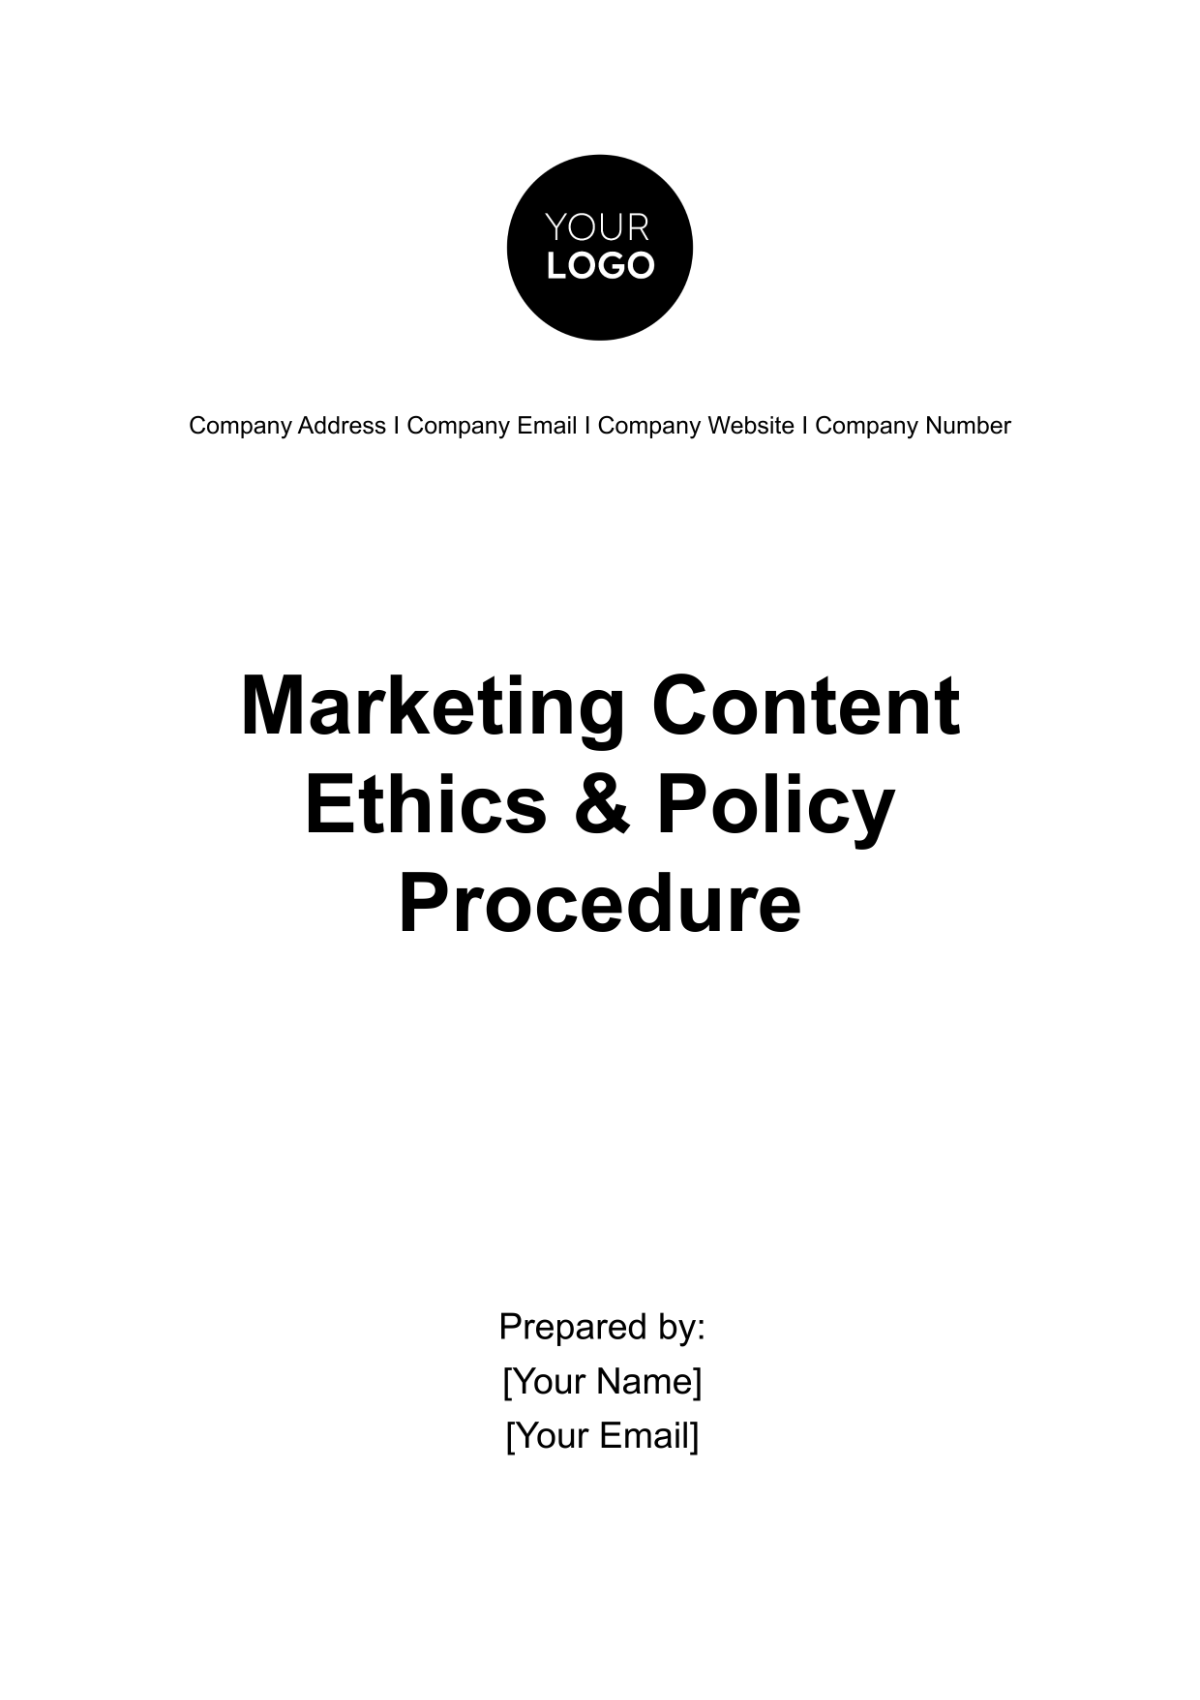 Marketing Content Ethics & Policy Procedure Template